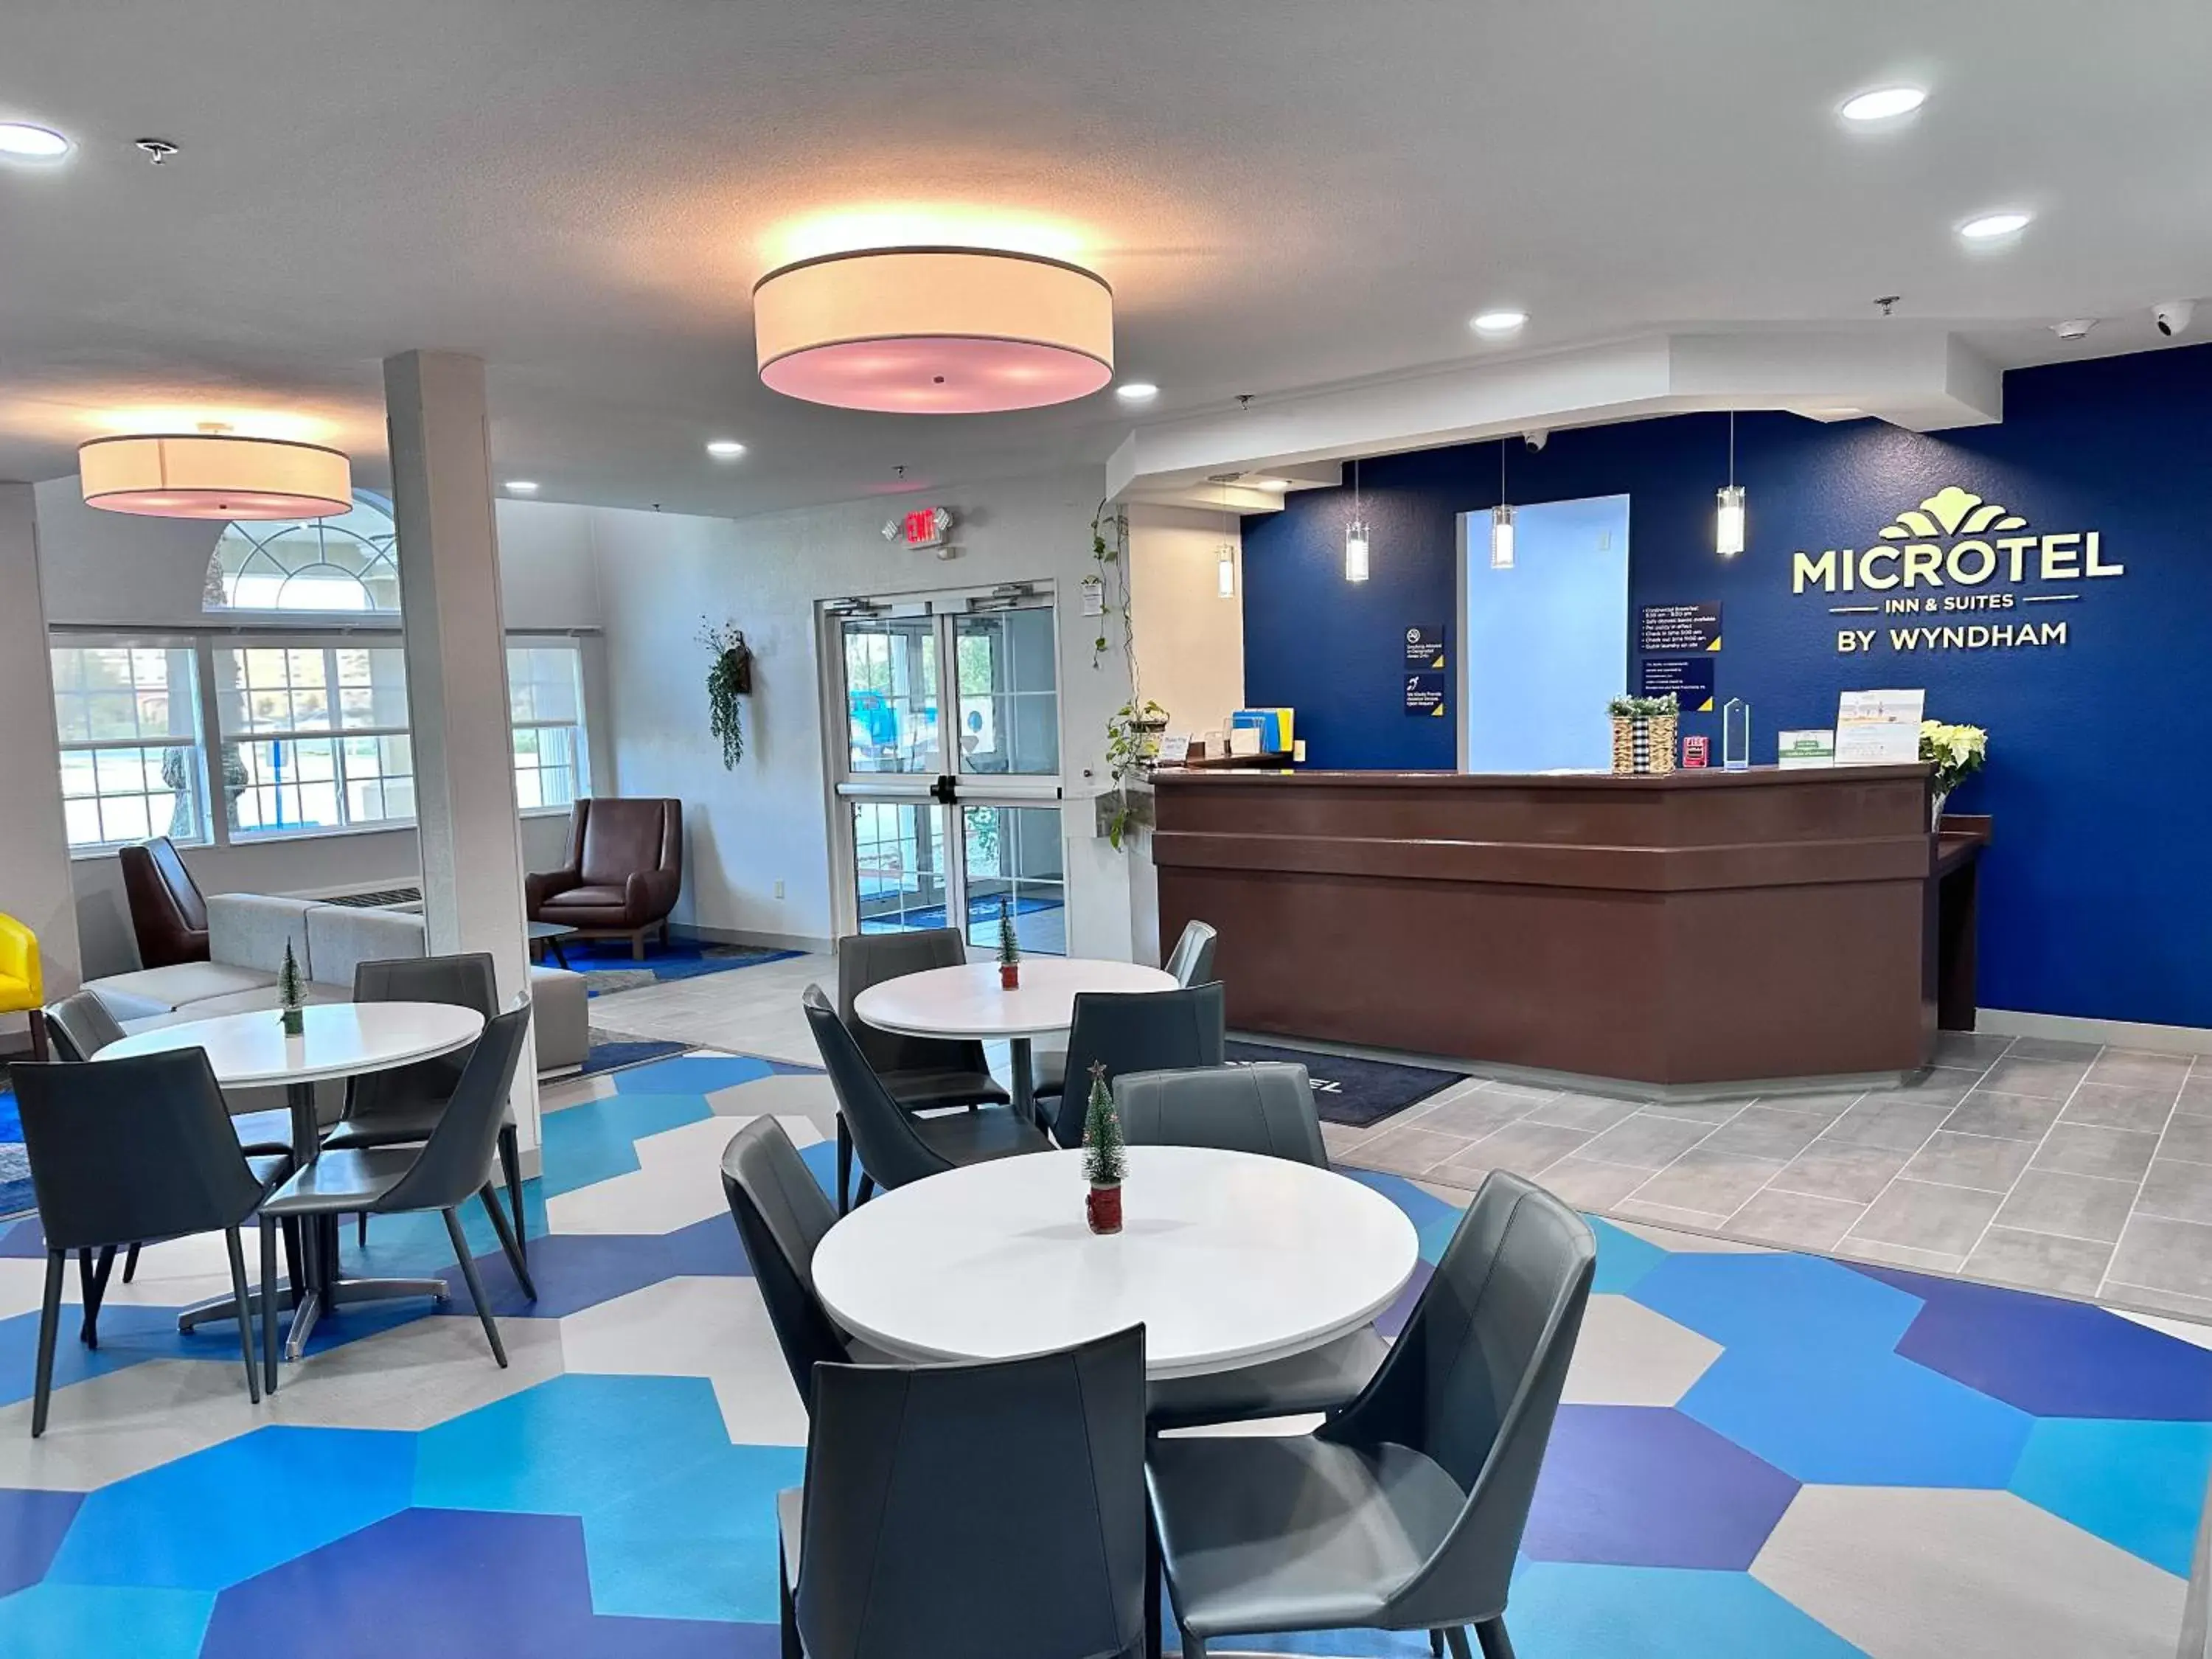 Lobby or reception in Microtel Inn & Suites by Wyndham of Houma